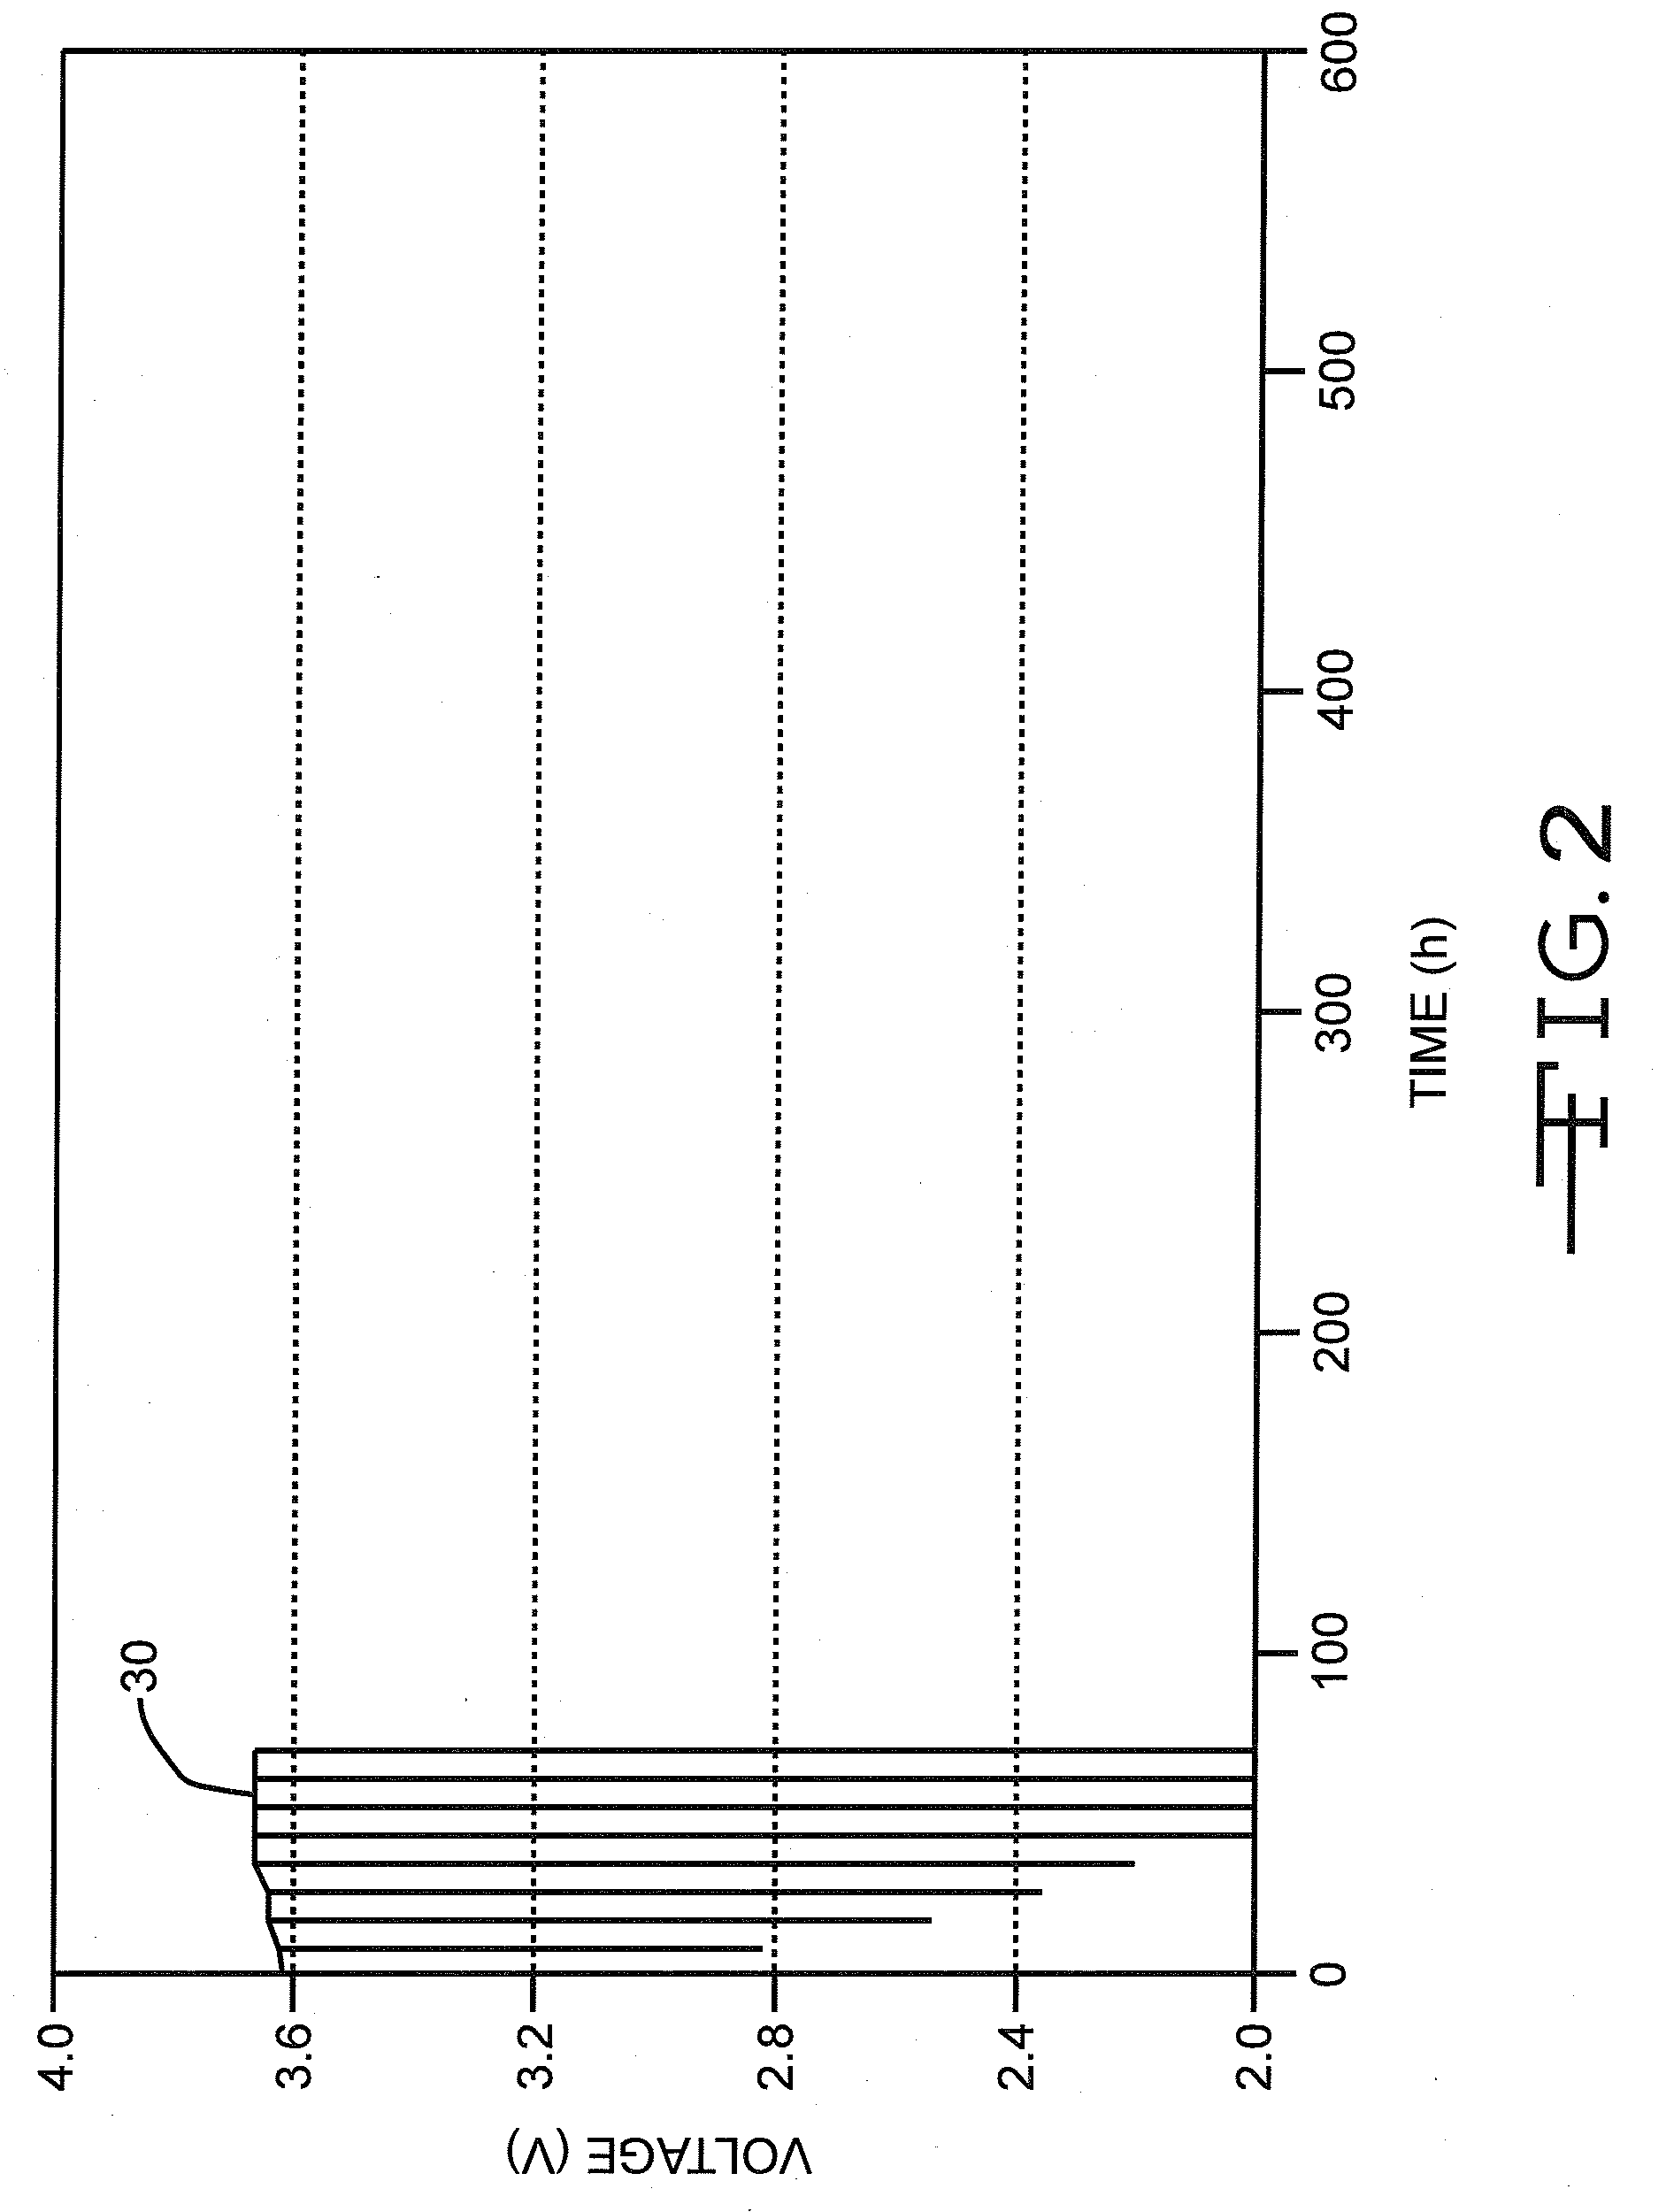 In parallel hybrid power source comprising a lithium/oxyhalide electrochemical cell coupled with a lithium ion cell